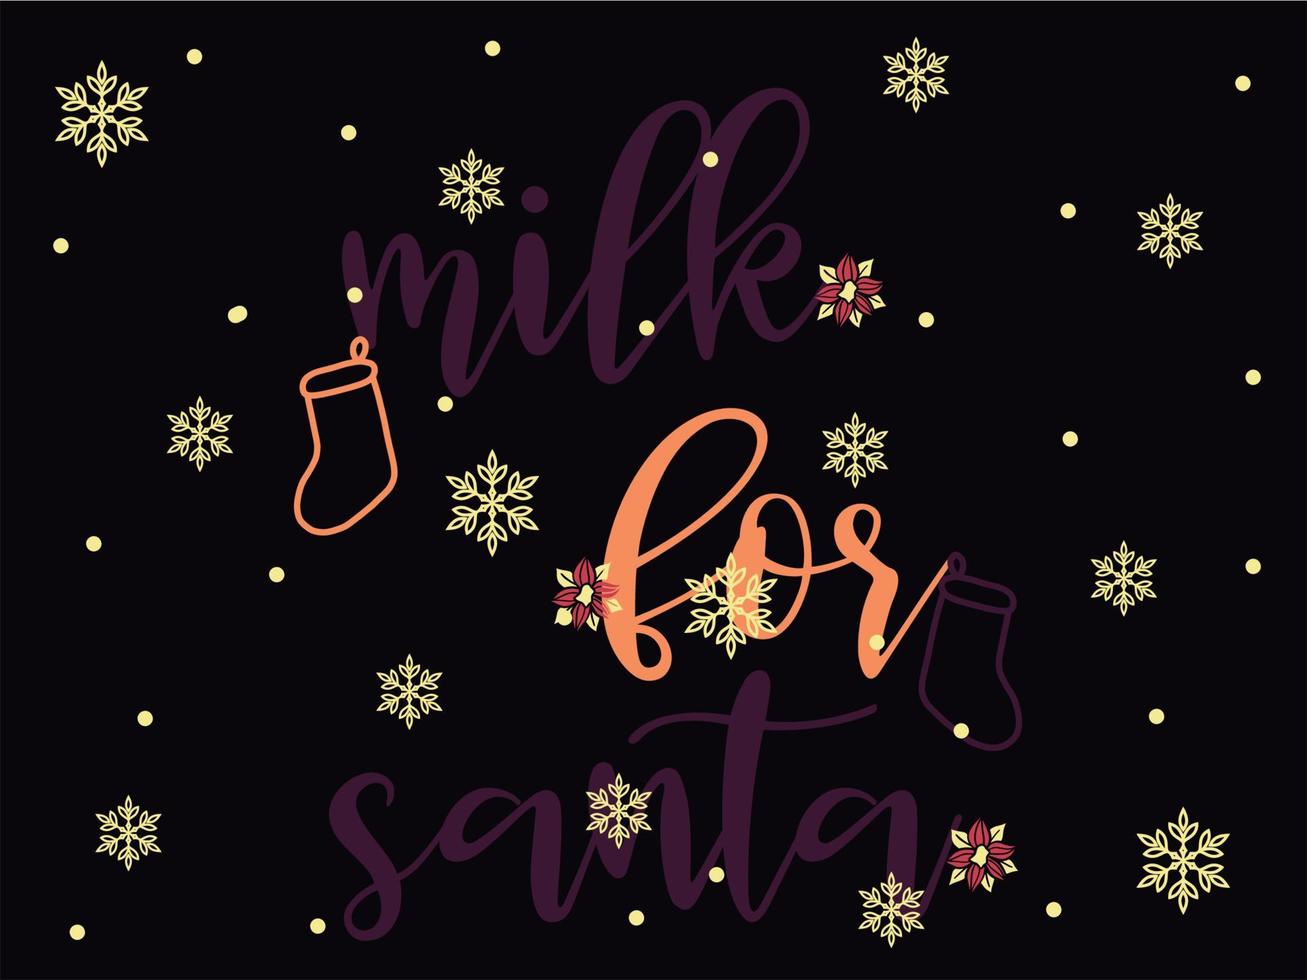 Milk for Santa 03 Merry Christmas and Happy Holidays Typography set vector